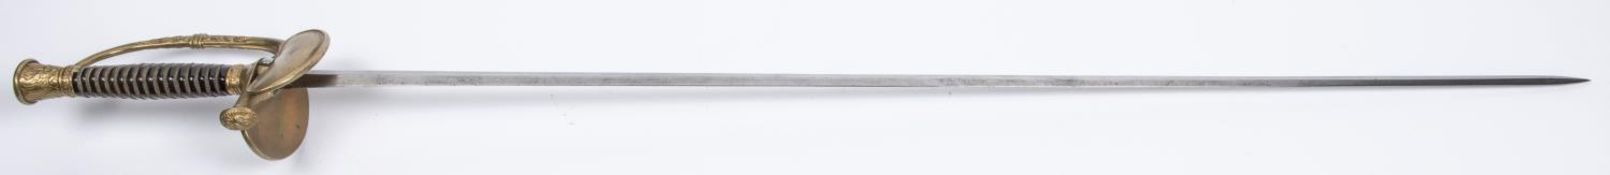 A French officer's epee, c 1880, plain flat diamond section blade 32", brass hilt with double